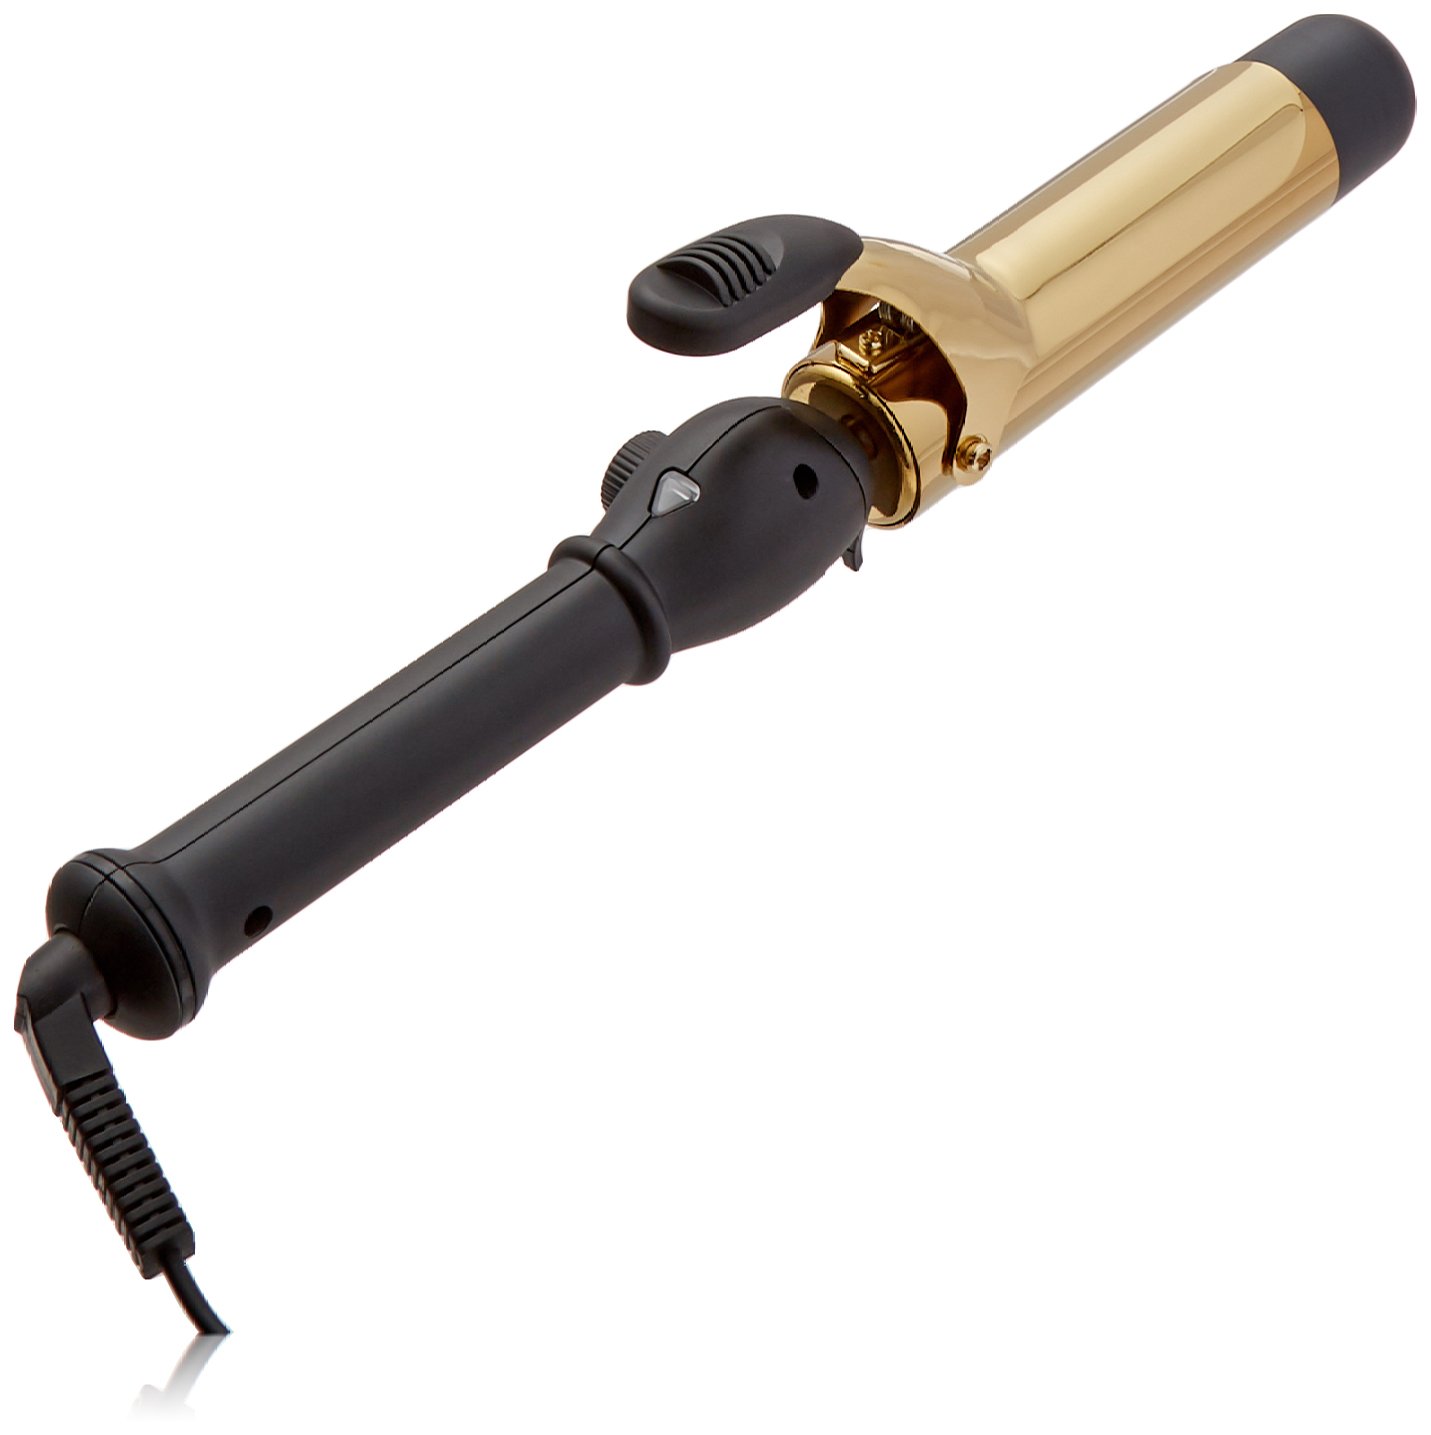 Paul Mitchell Pro Tools Express Gold Curl Titanium Curling Iron, Fast-Heating to Create a Variety of Curls